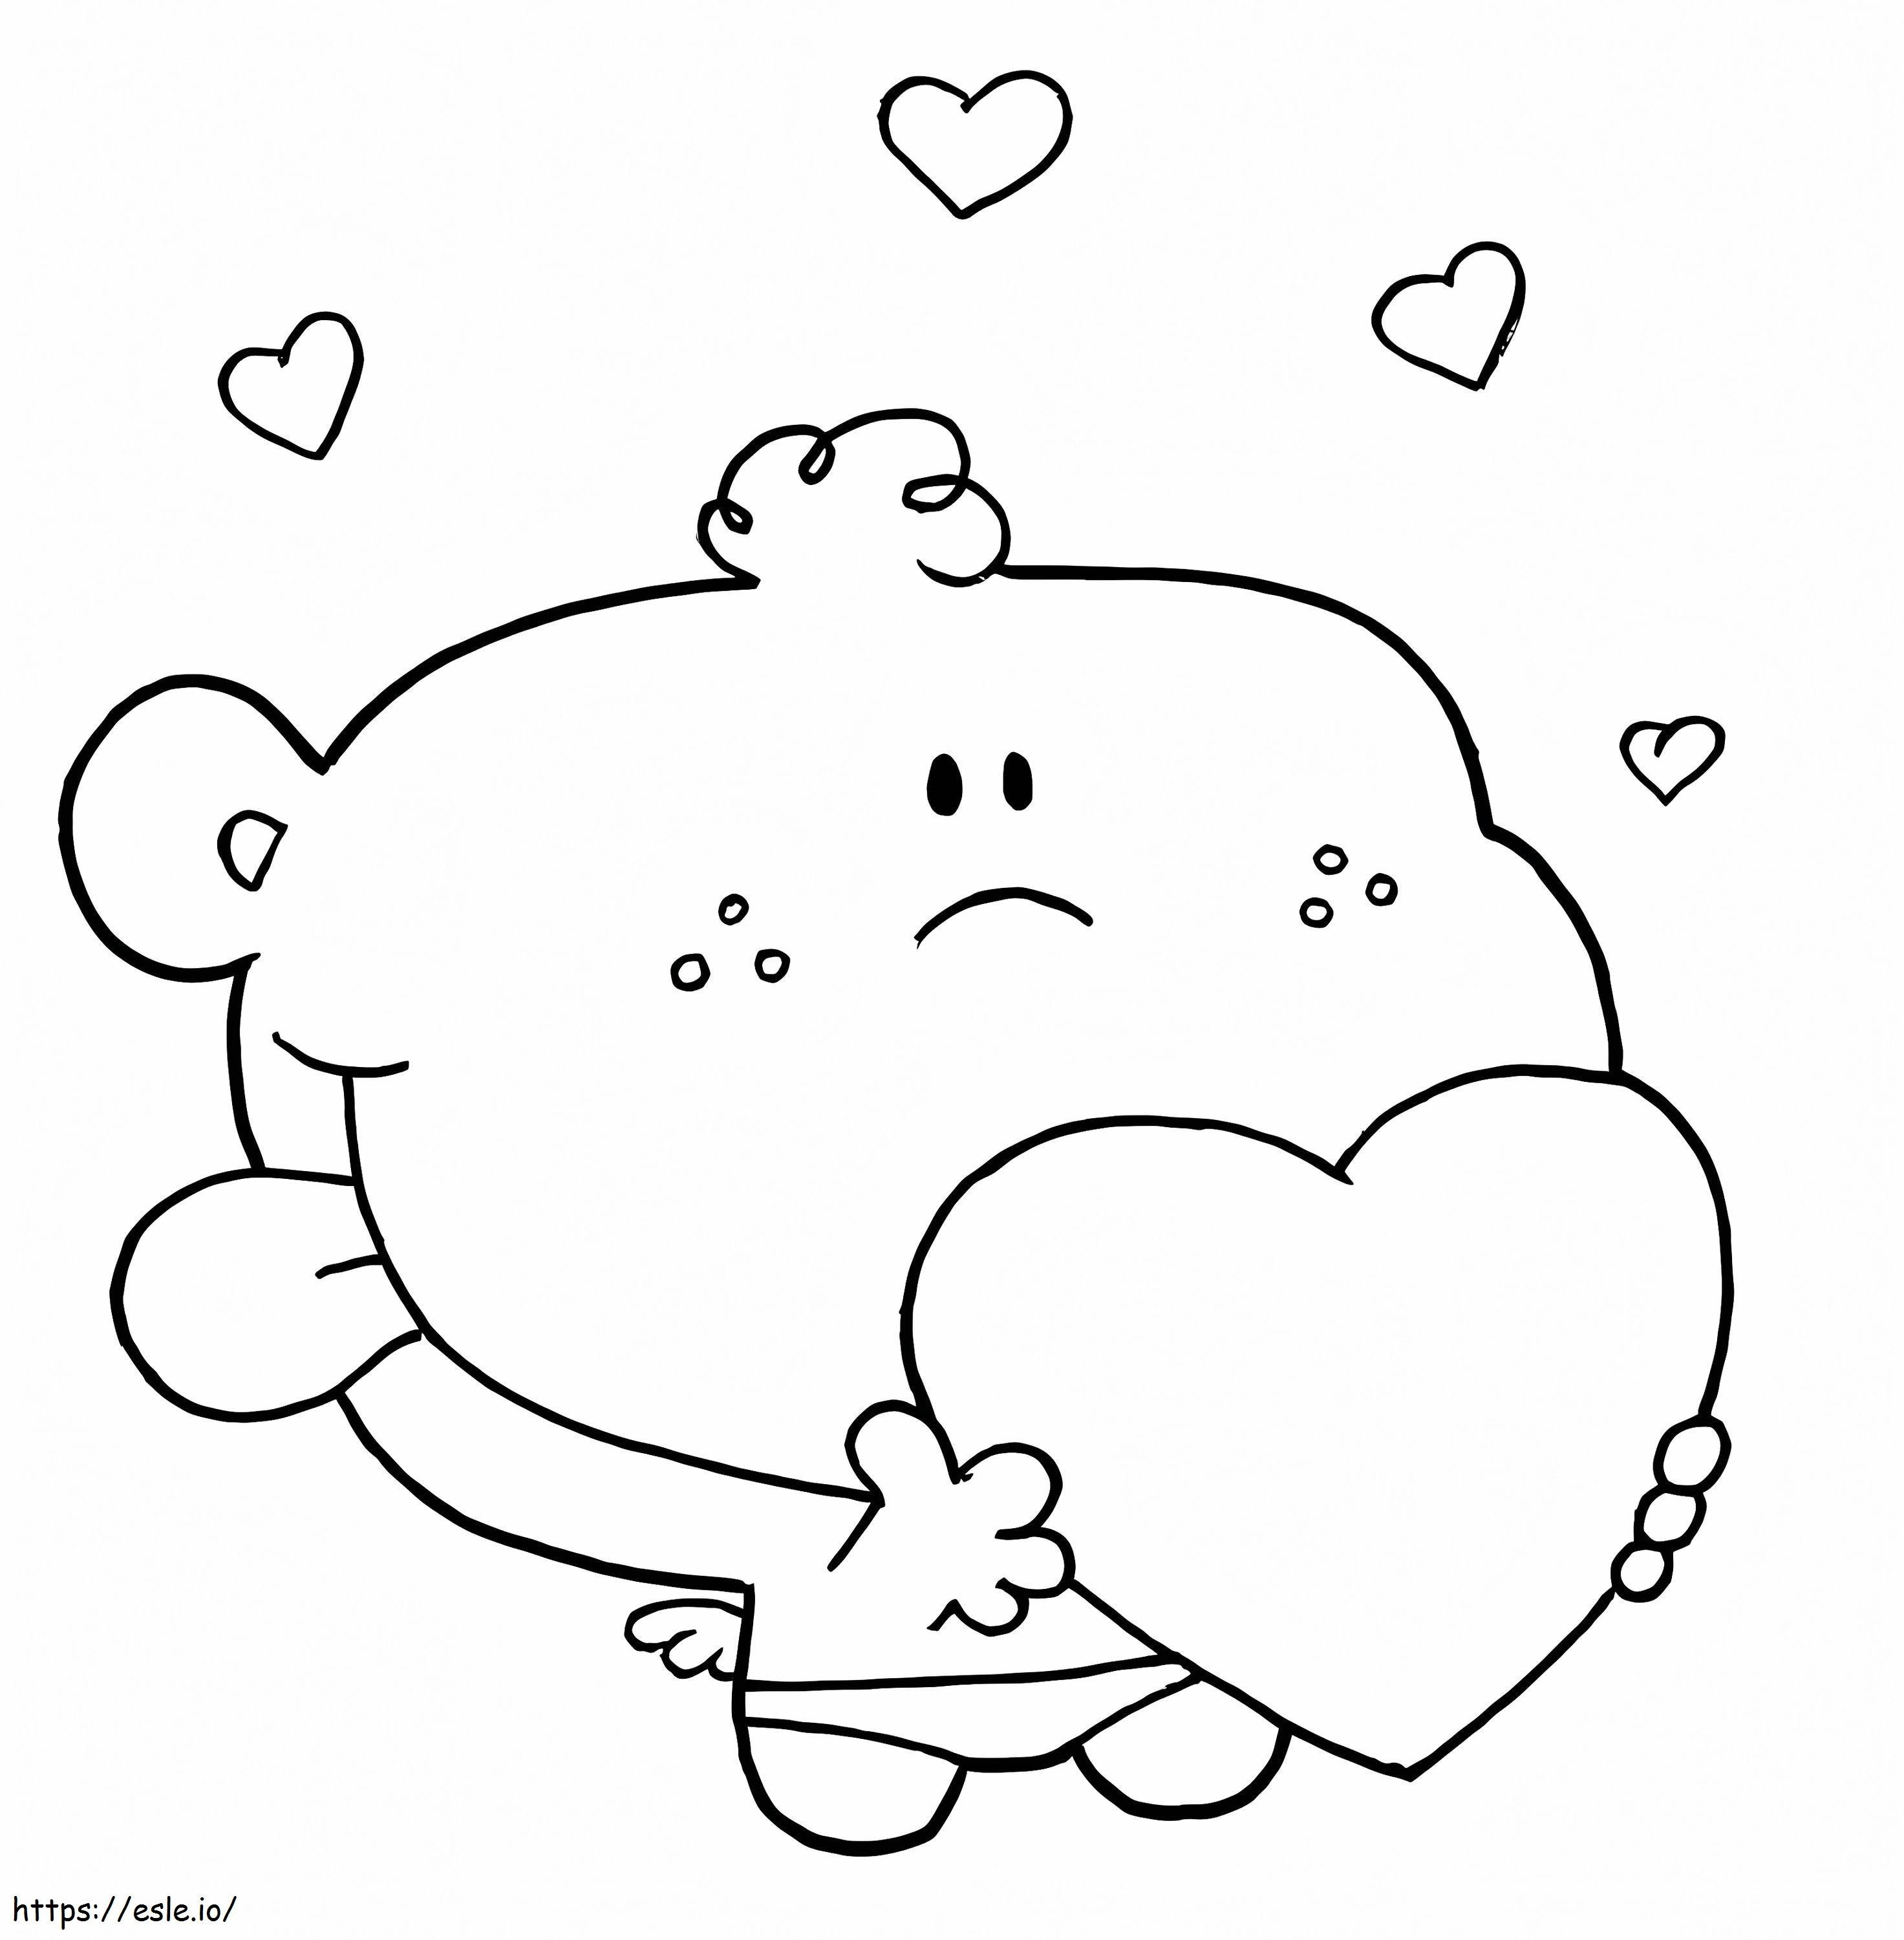 Cupid With Hearts coloring page